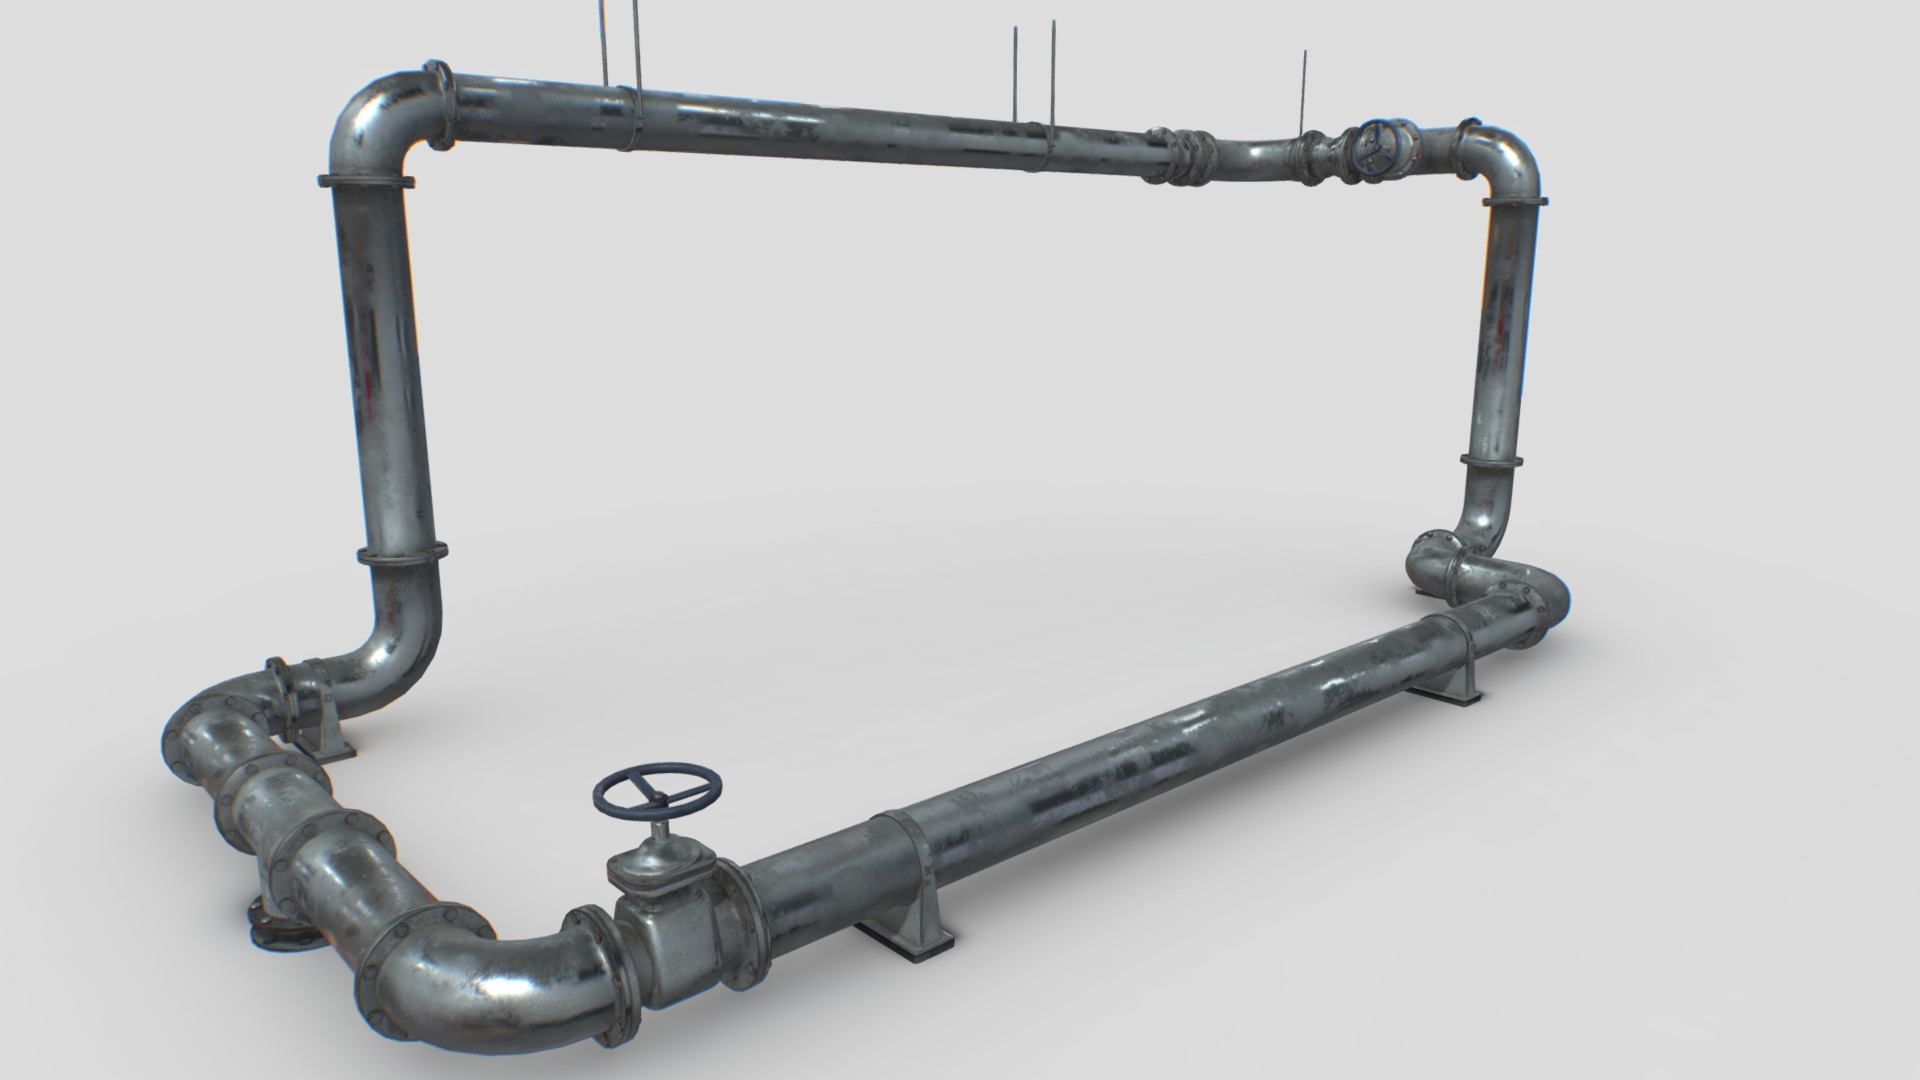 3D model Modular pipes pack 2 - This is a 3D model of the Modular pipes pack 2. The 3D model is about a gun with a scope.